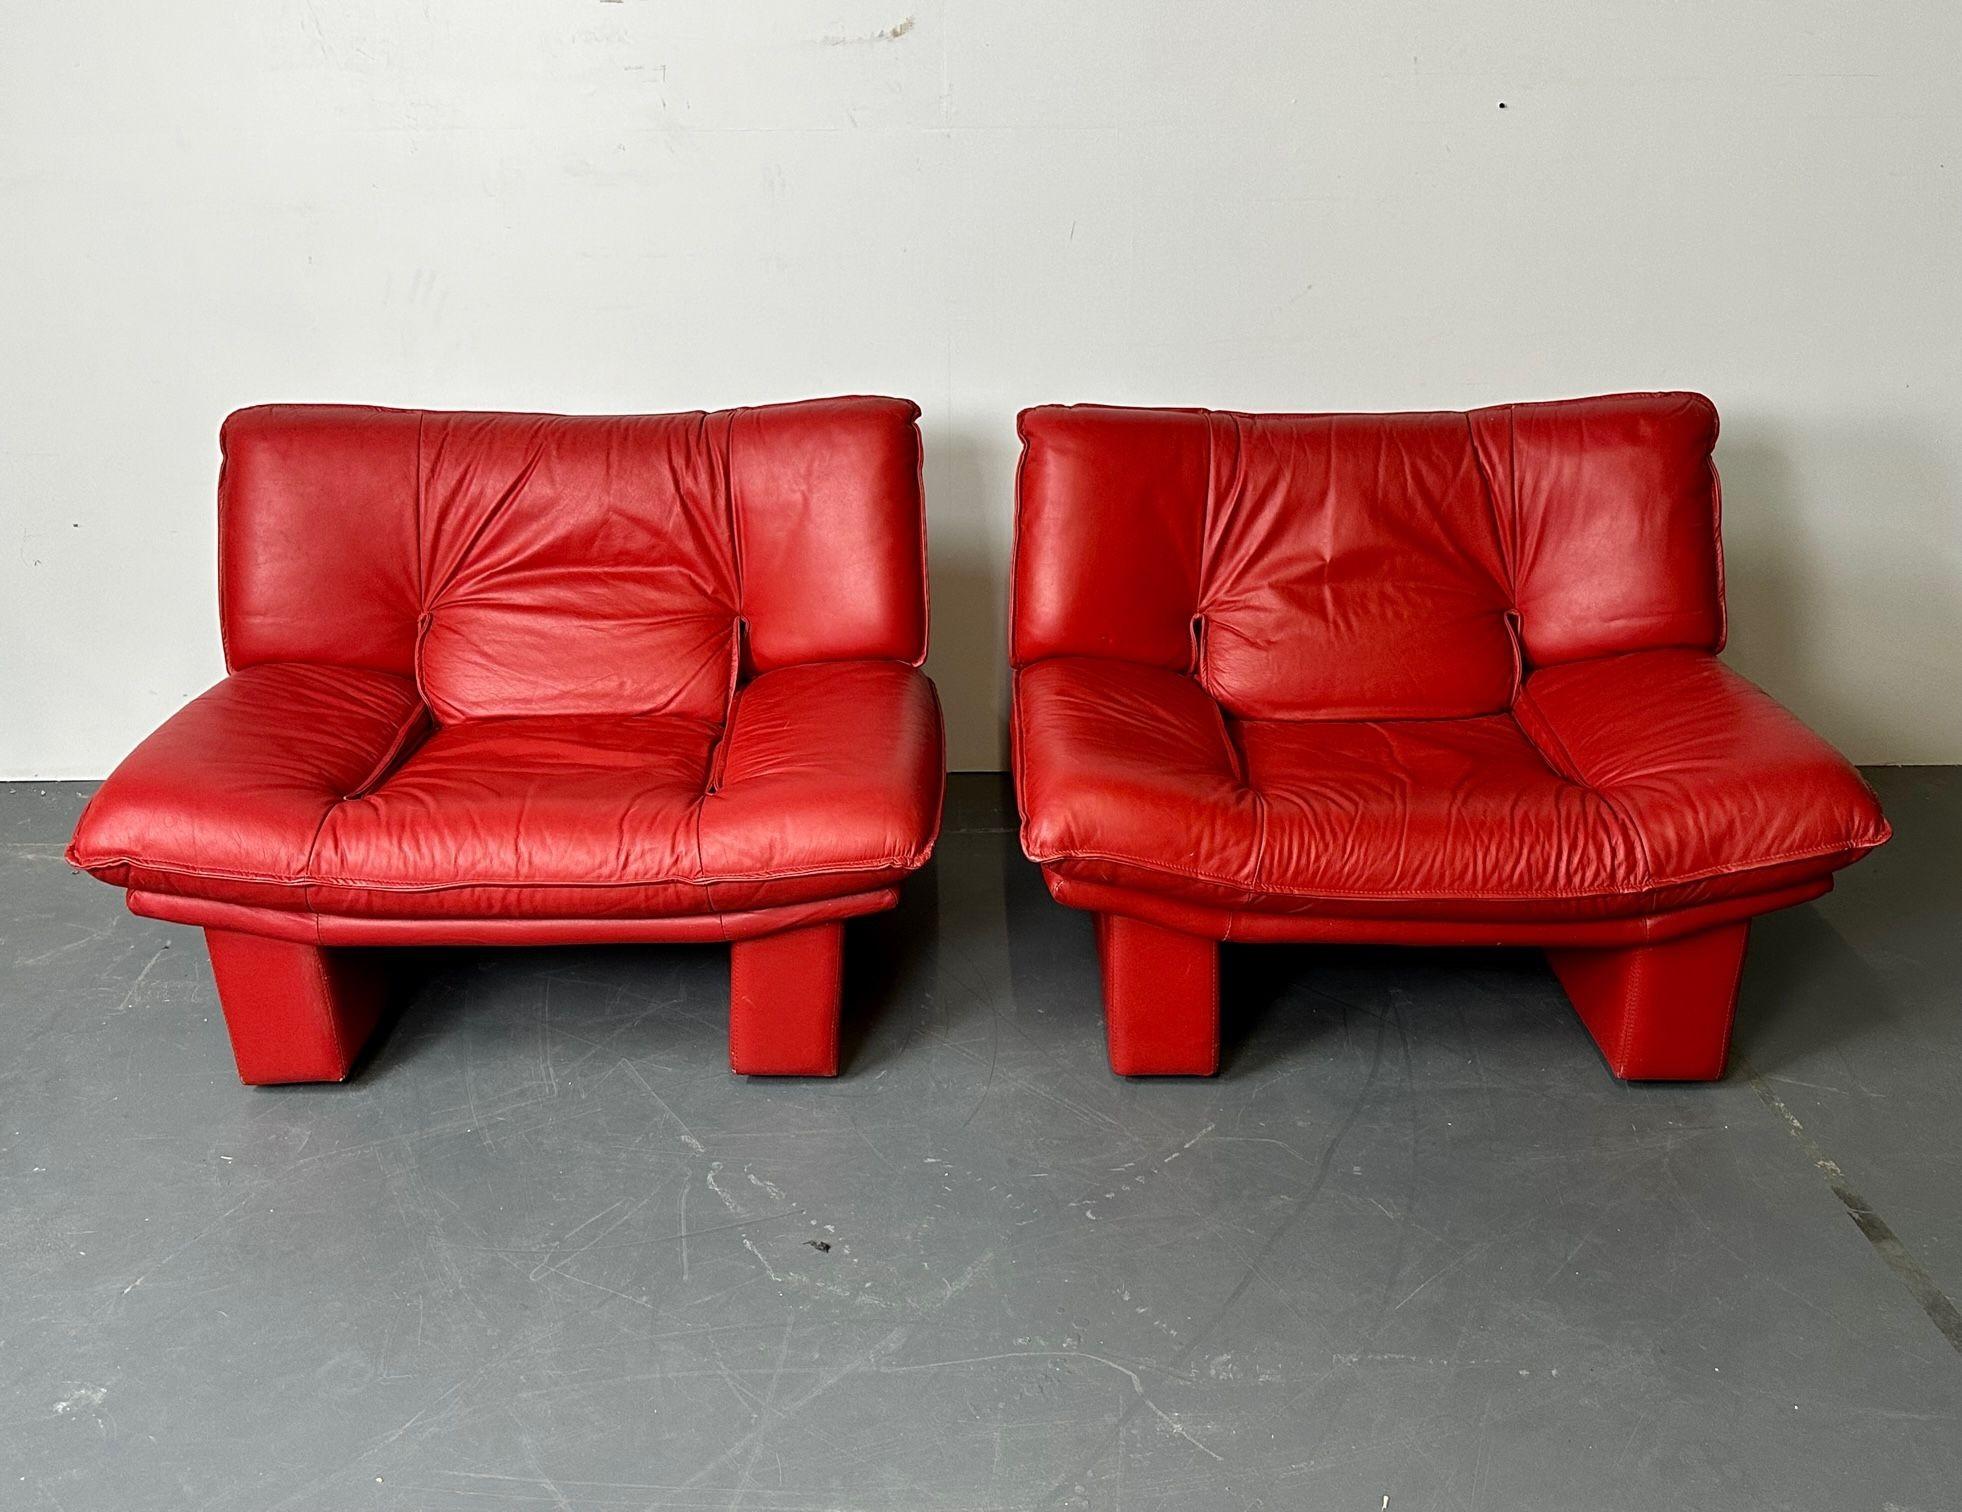 Contemporary Italian Modern Leather Pair of Arm, Lounge Chairs, Bitonto, Red Leather